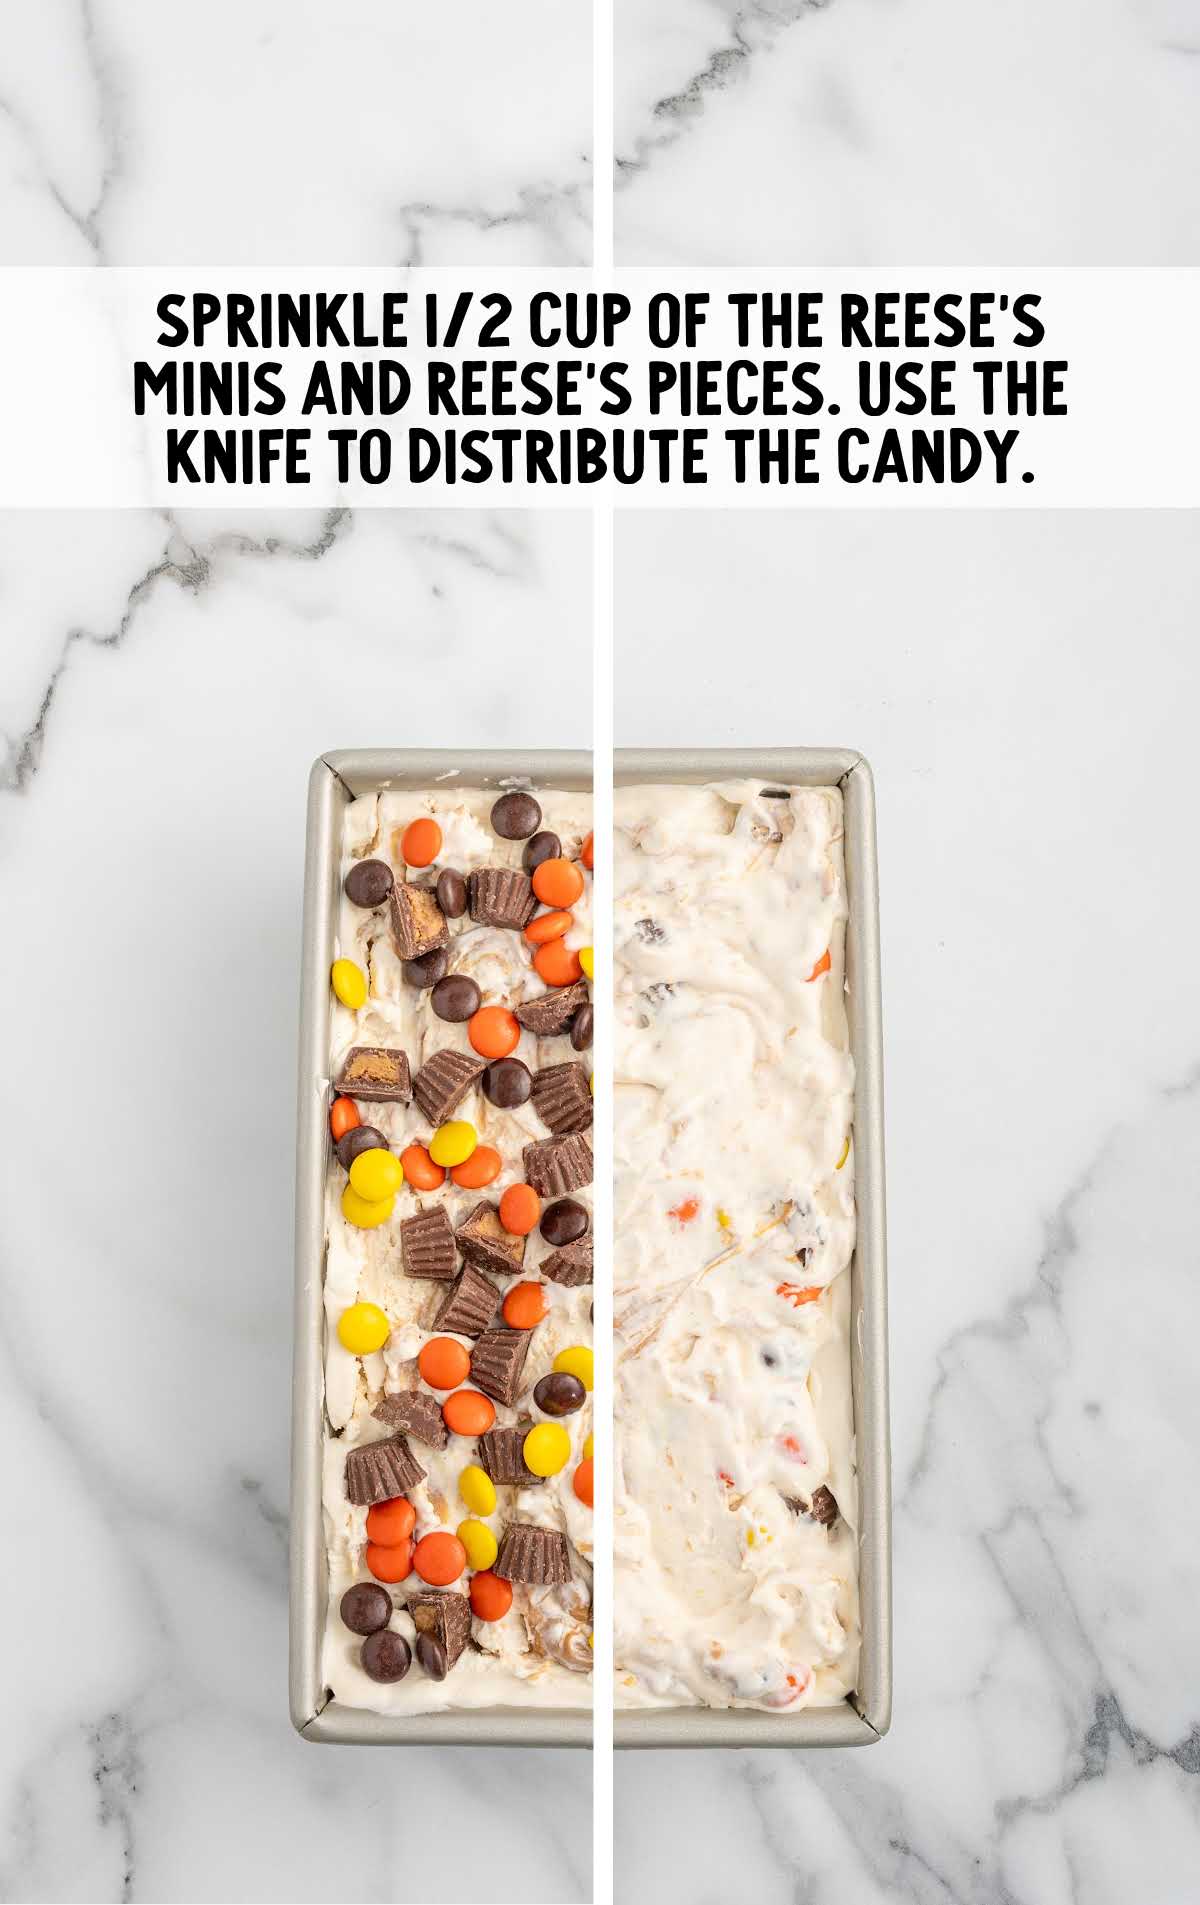 chopped peanut butter cups and Reese's Pieces sprinkled on top of the ice cream